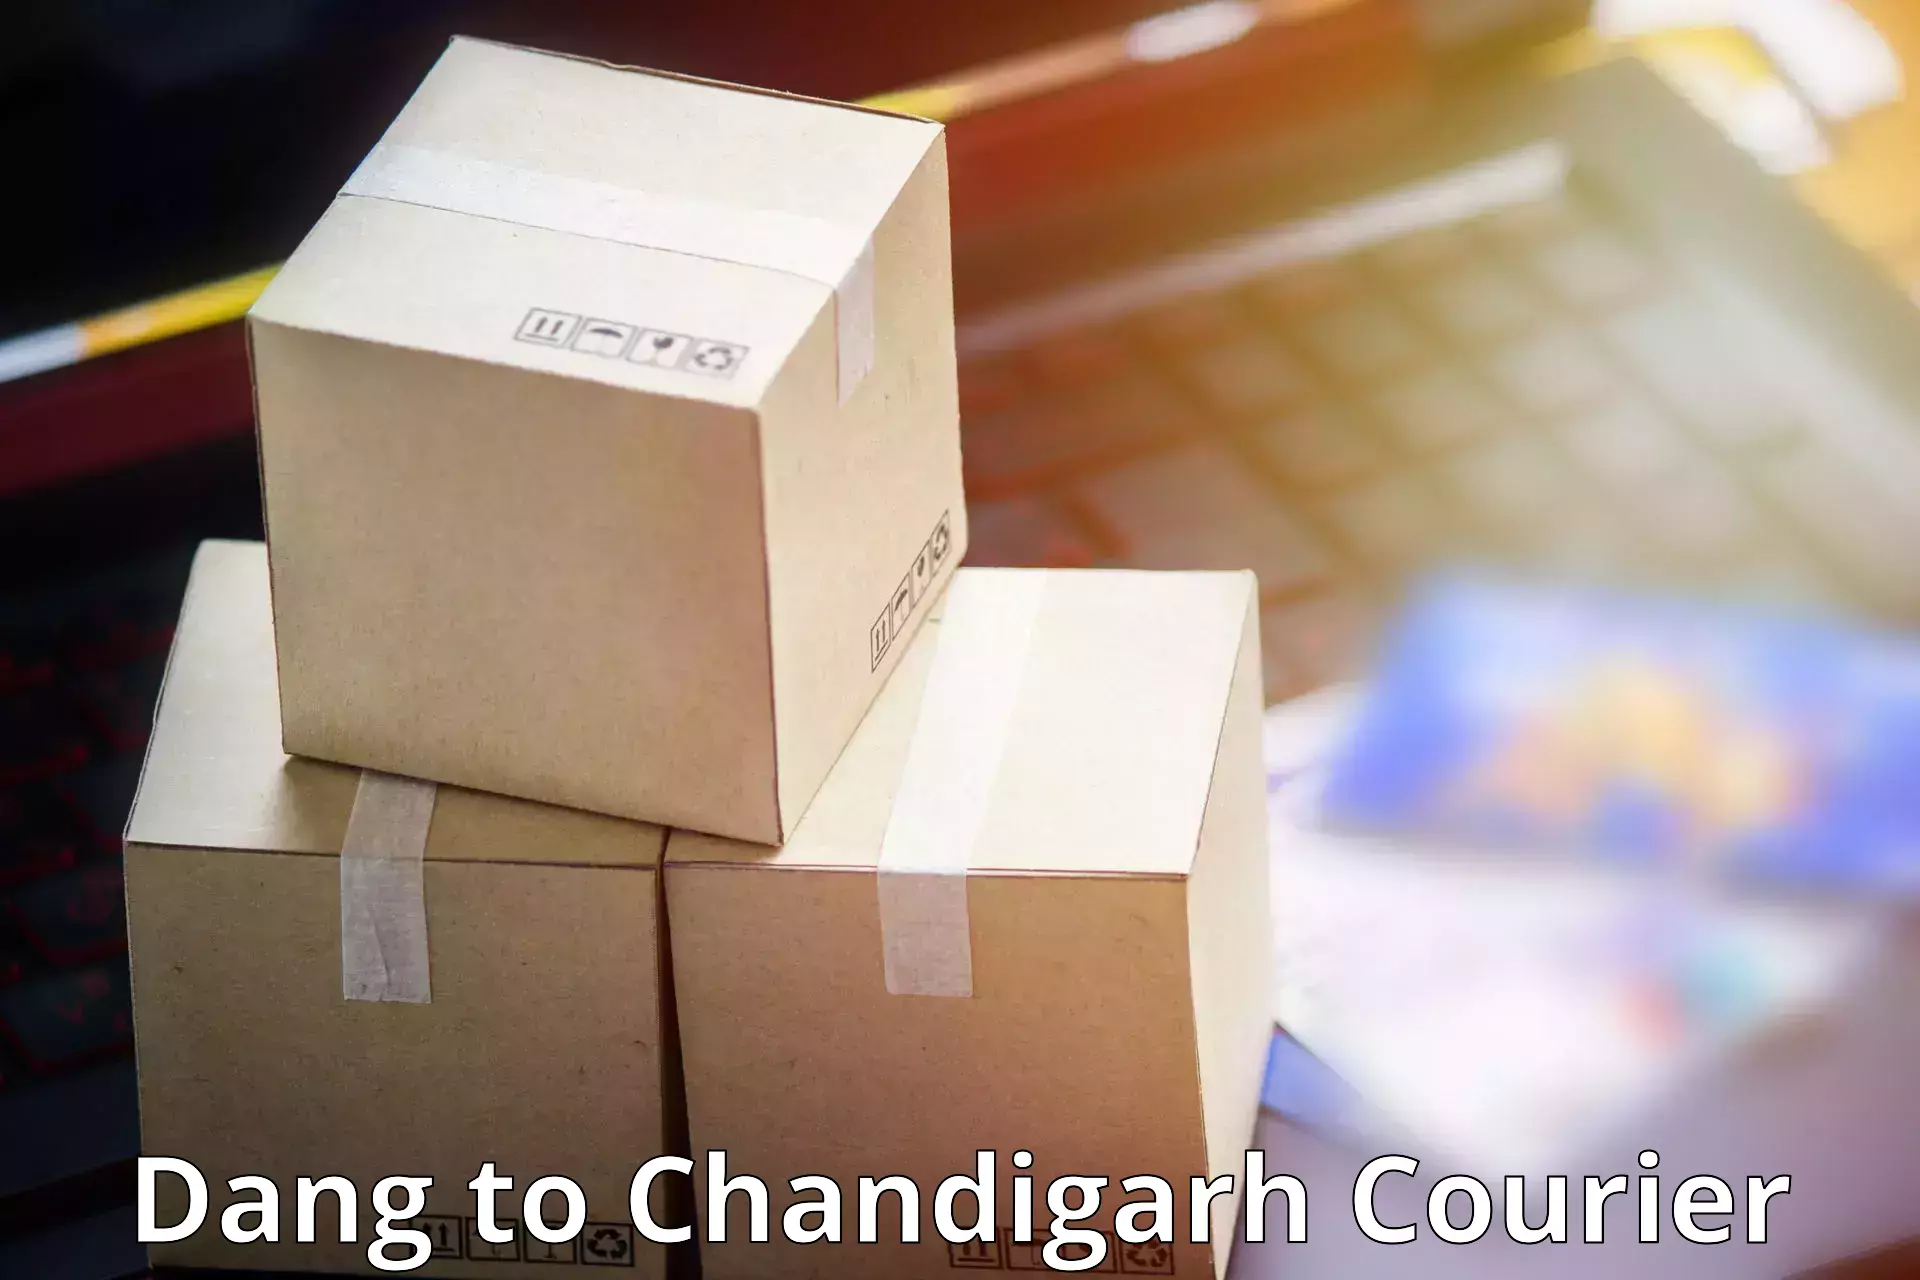 Customer-focused courier Dang to Chandigarh